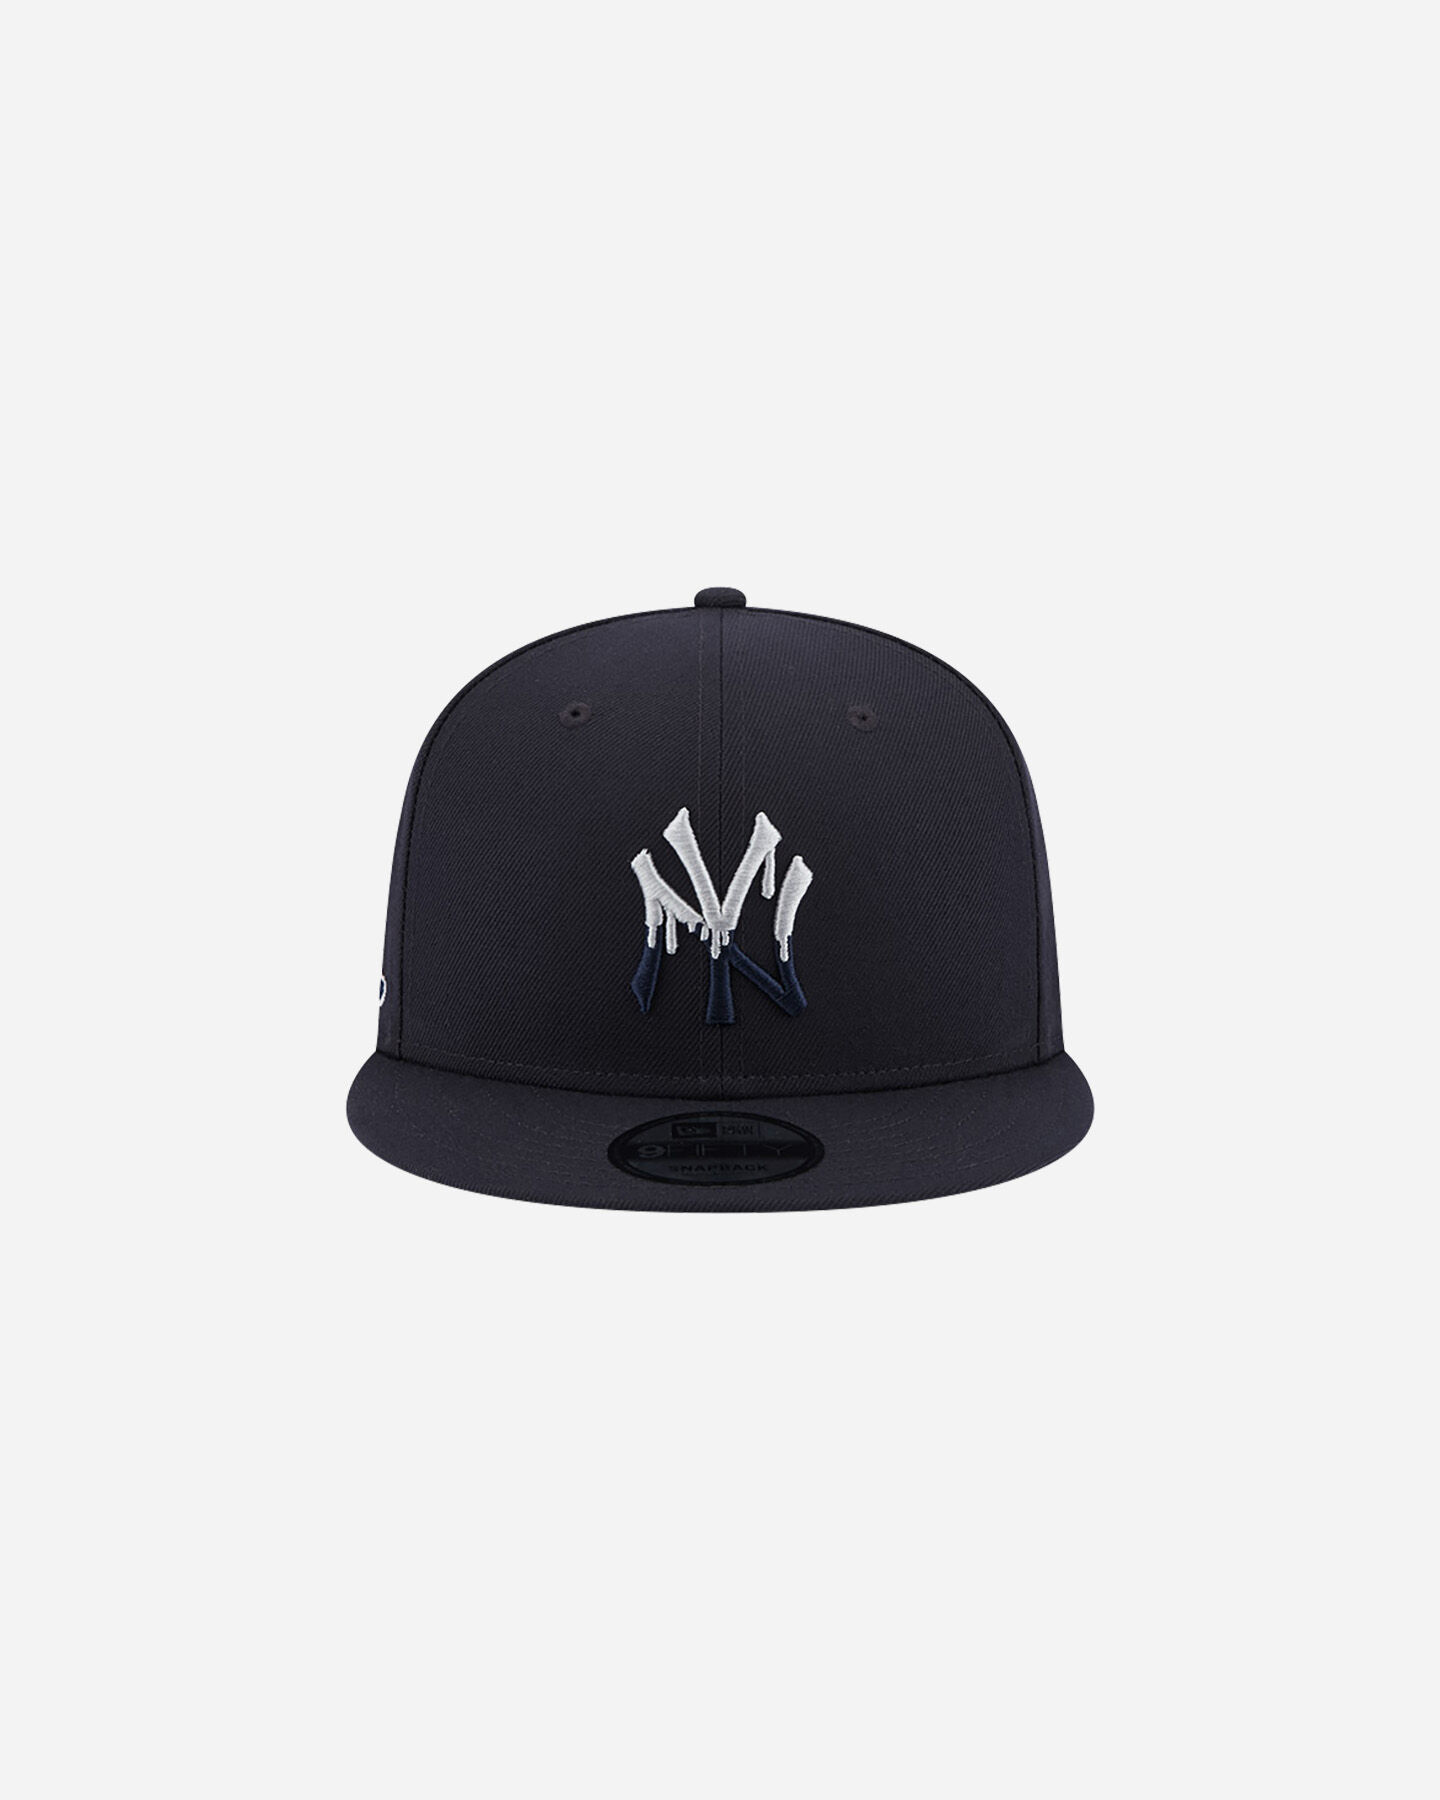  Cappellino NEW ERA 9FIFTY MLB TEAM DRIP NEW YORK YANKEES  S5606104|410|SM scatto 1